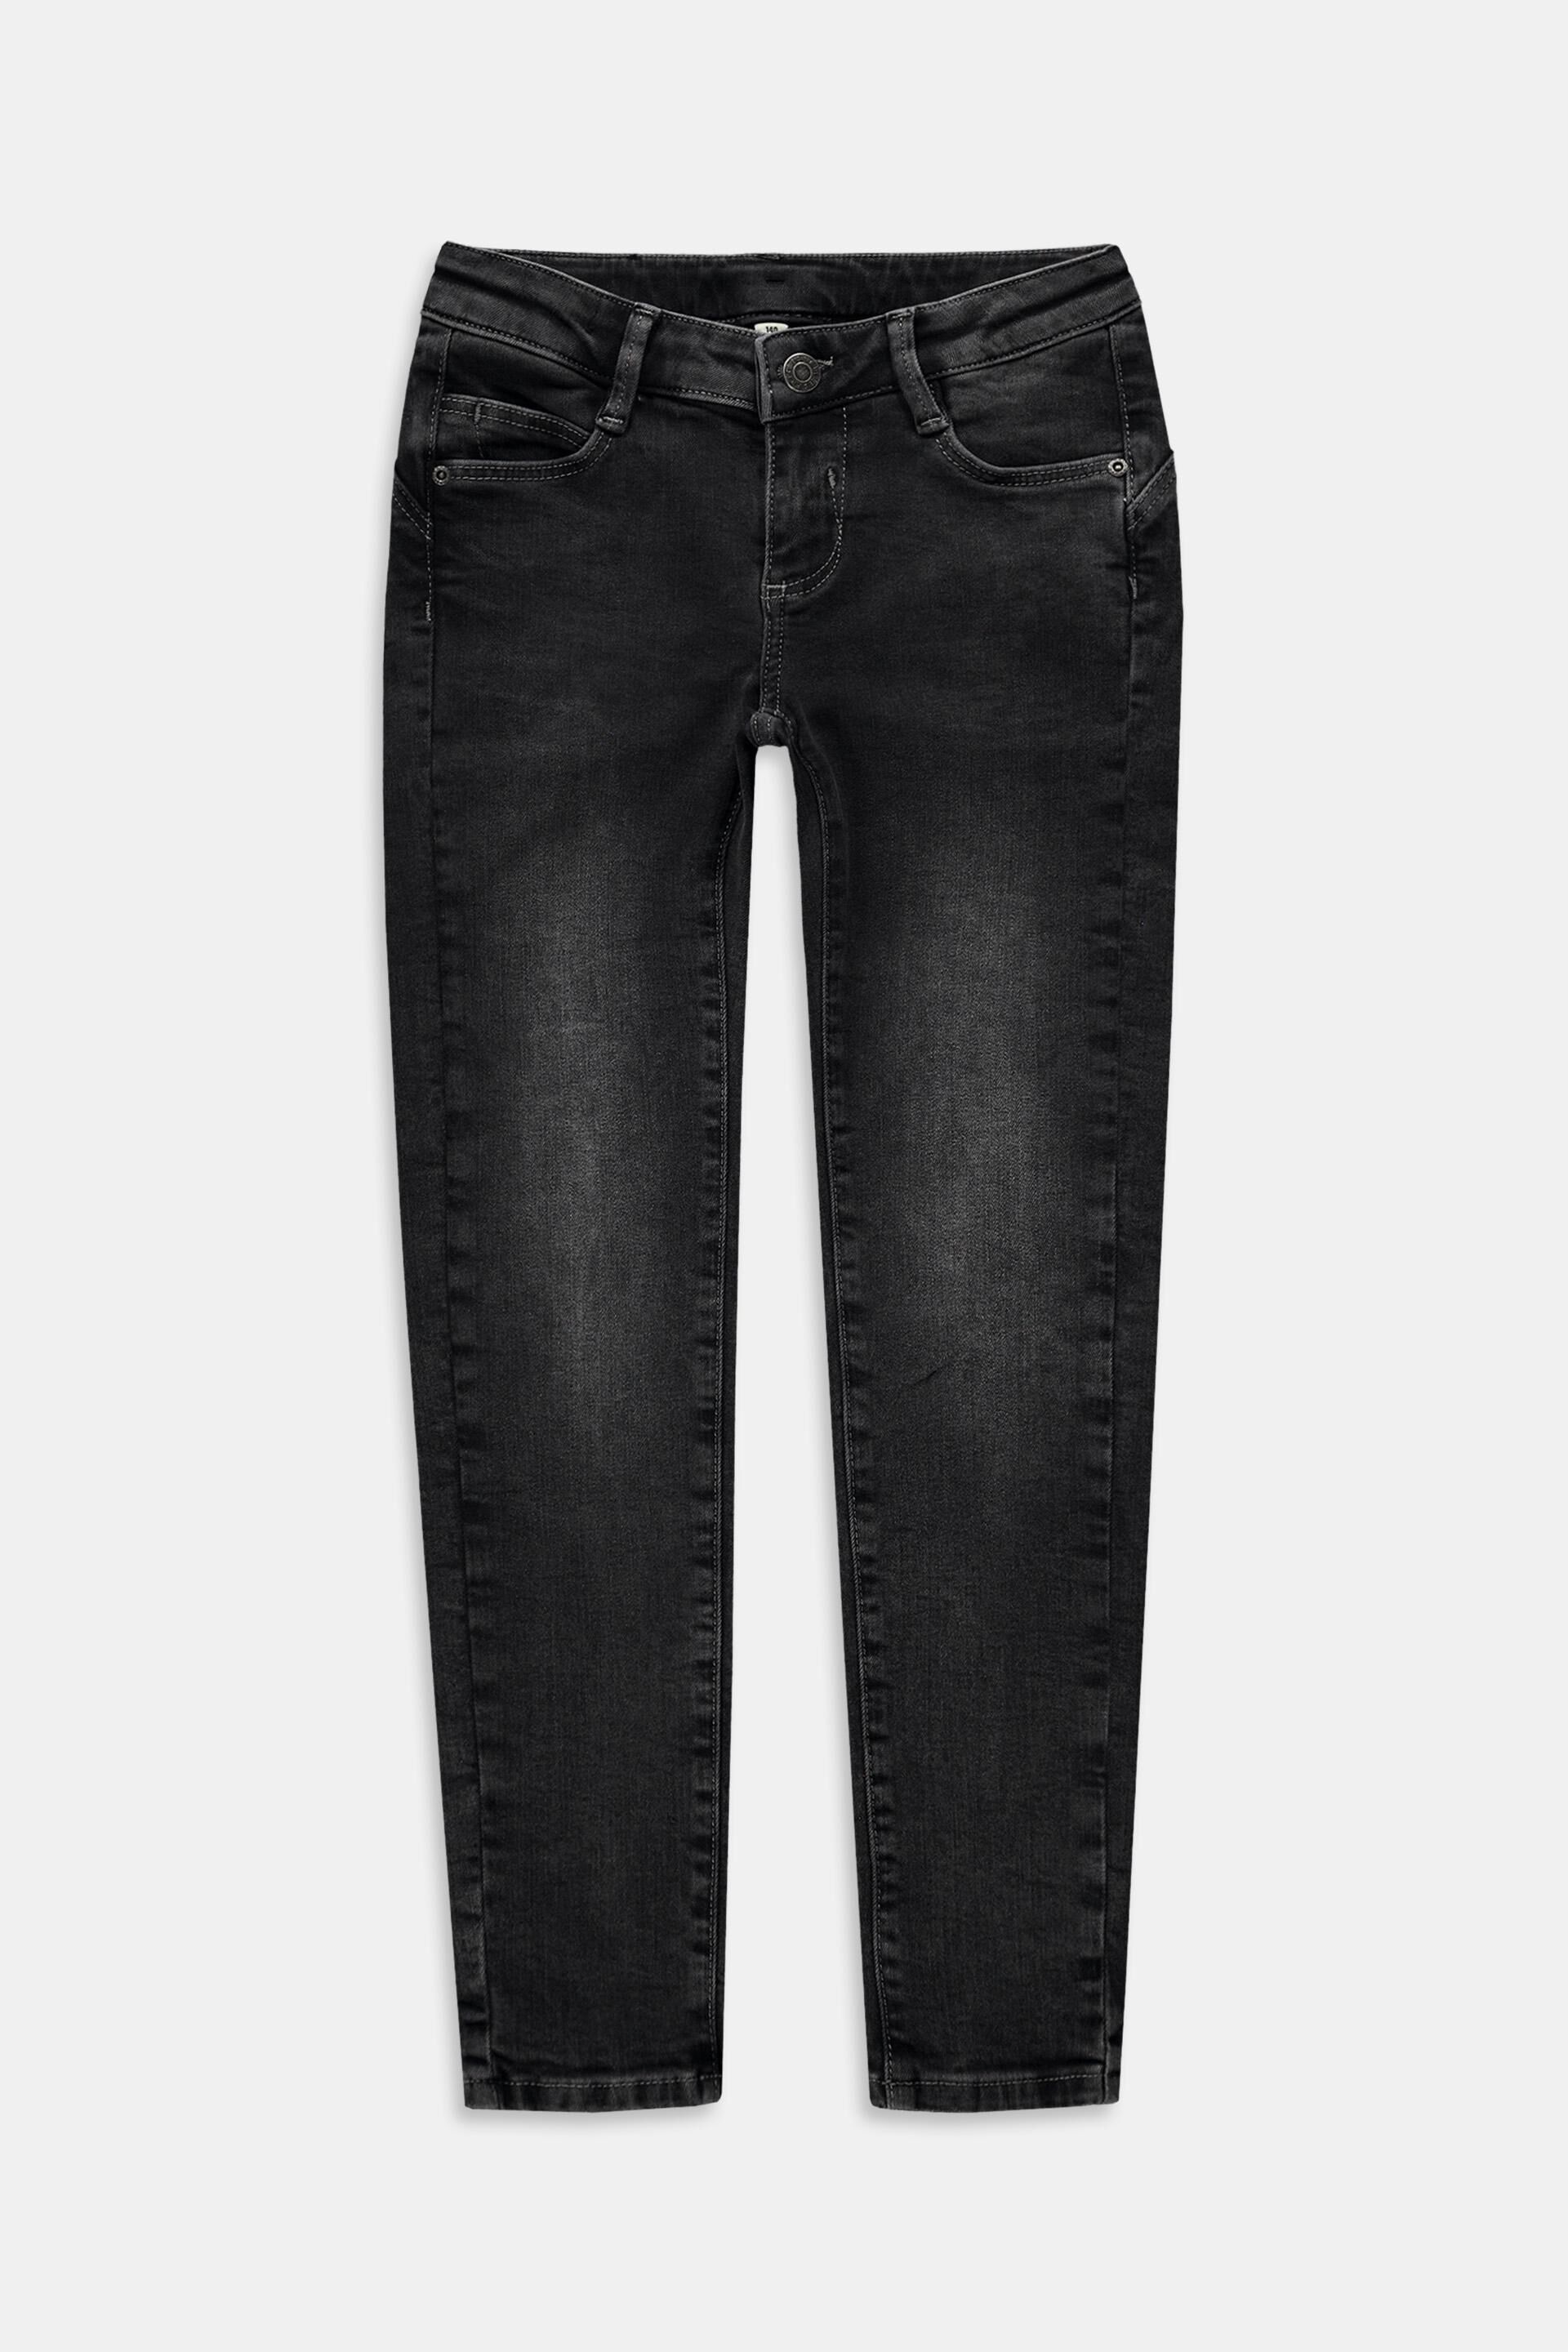 Esprit Teppich Skinny fit jeans with adjustable waistband